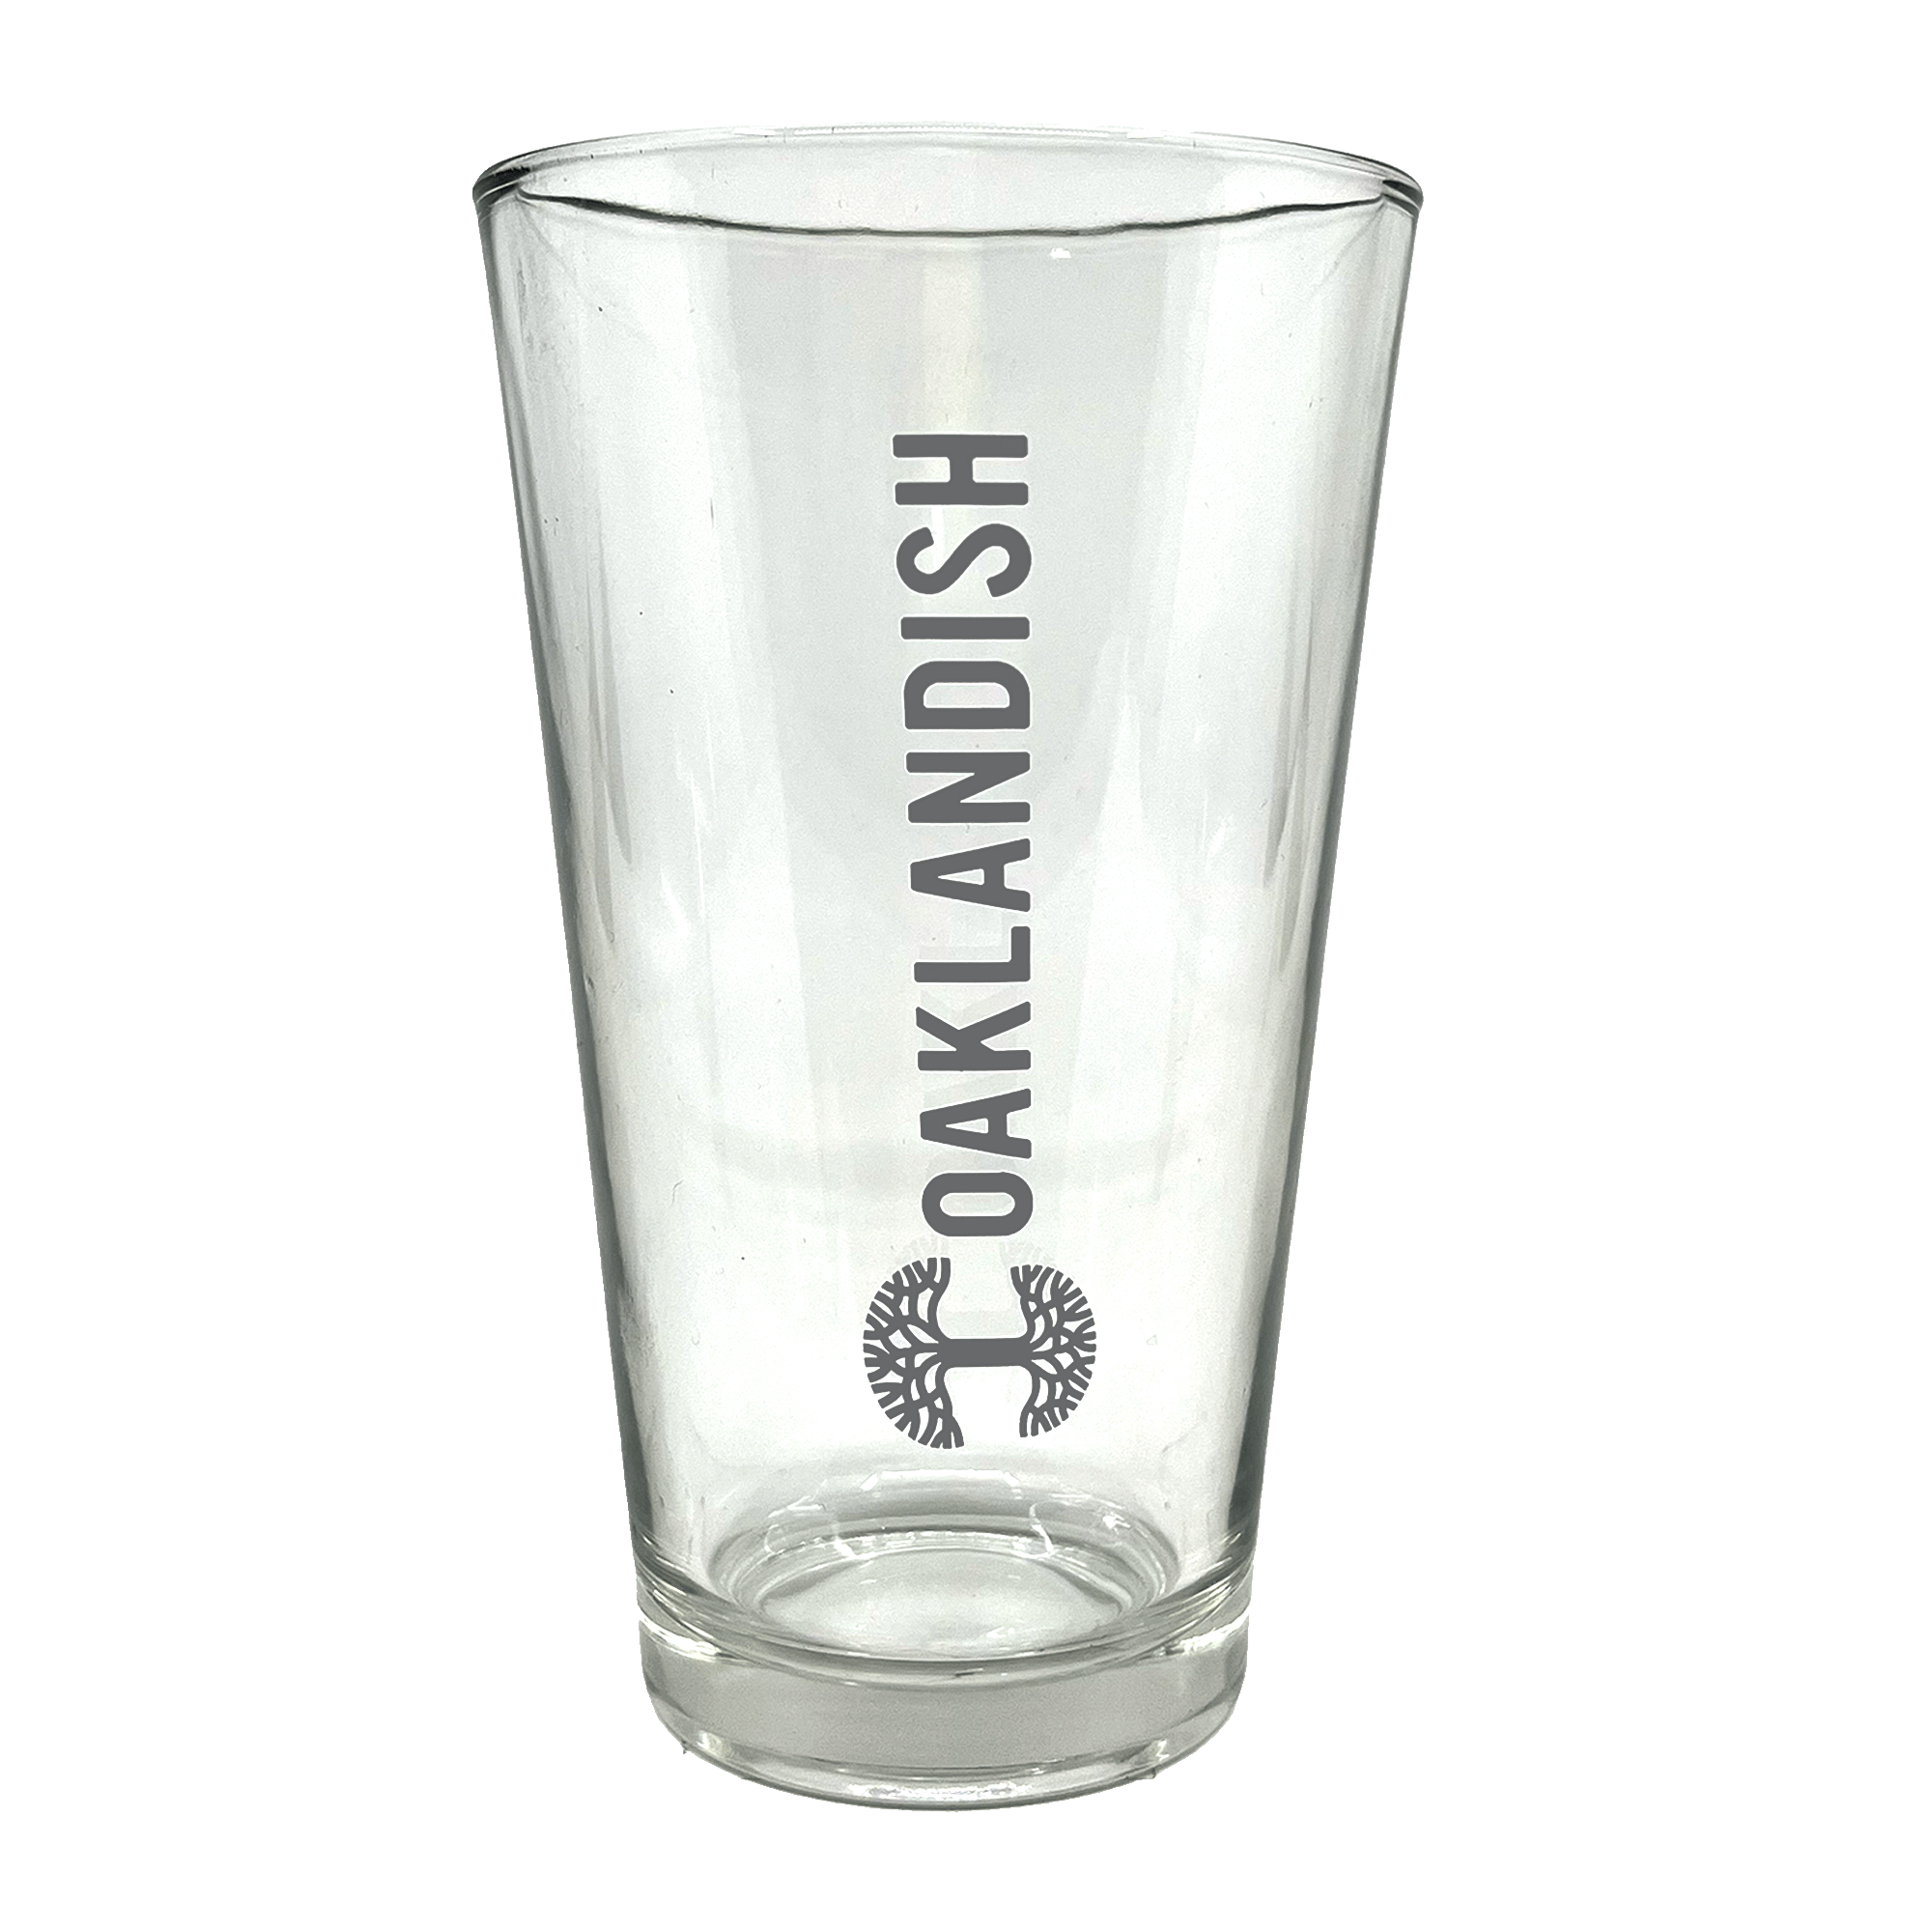 Clear 16 oz glass beer pint glass with dark grey Oaklandish logo and wordmark imprint.